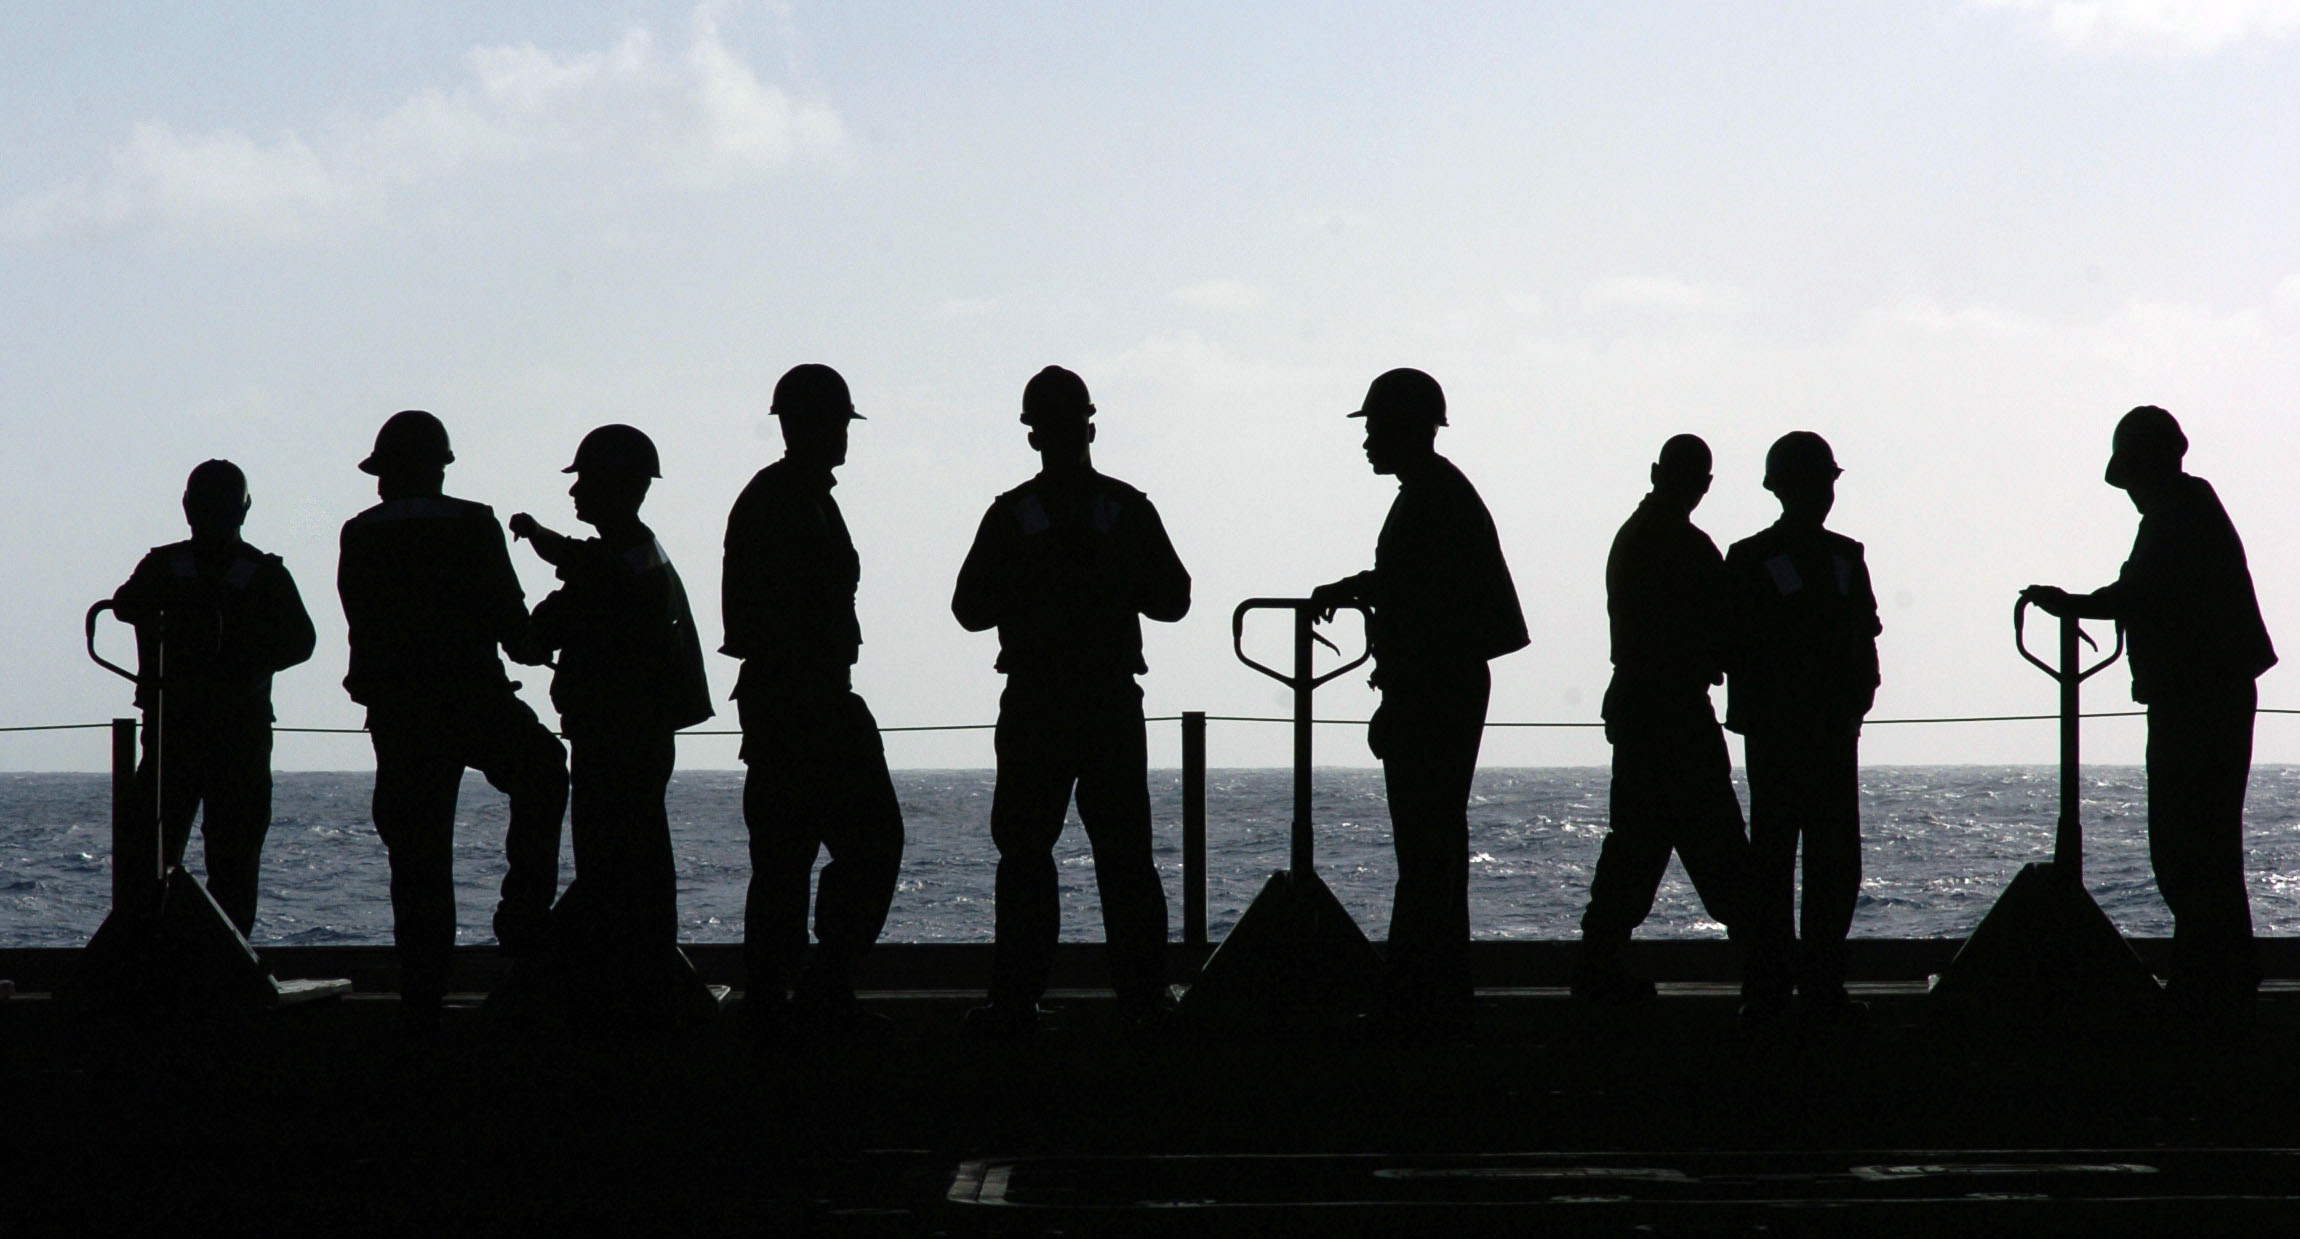 US Navy 060113-N-7130B-127 Sailors aboard the Nimitz-class aircraft carrier USS Ronald Reagan (CVN 76) wait for the next load of stores to be transported from the flight deck to the hangar bay